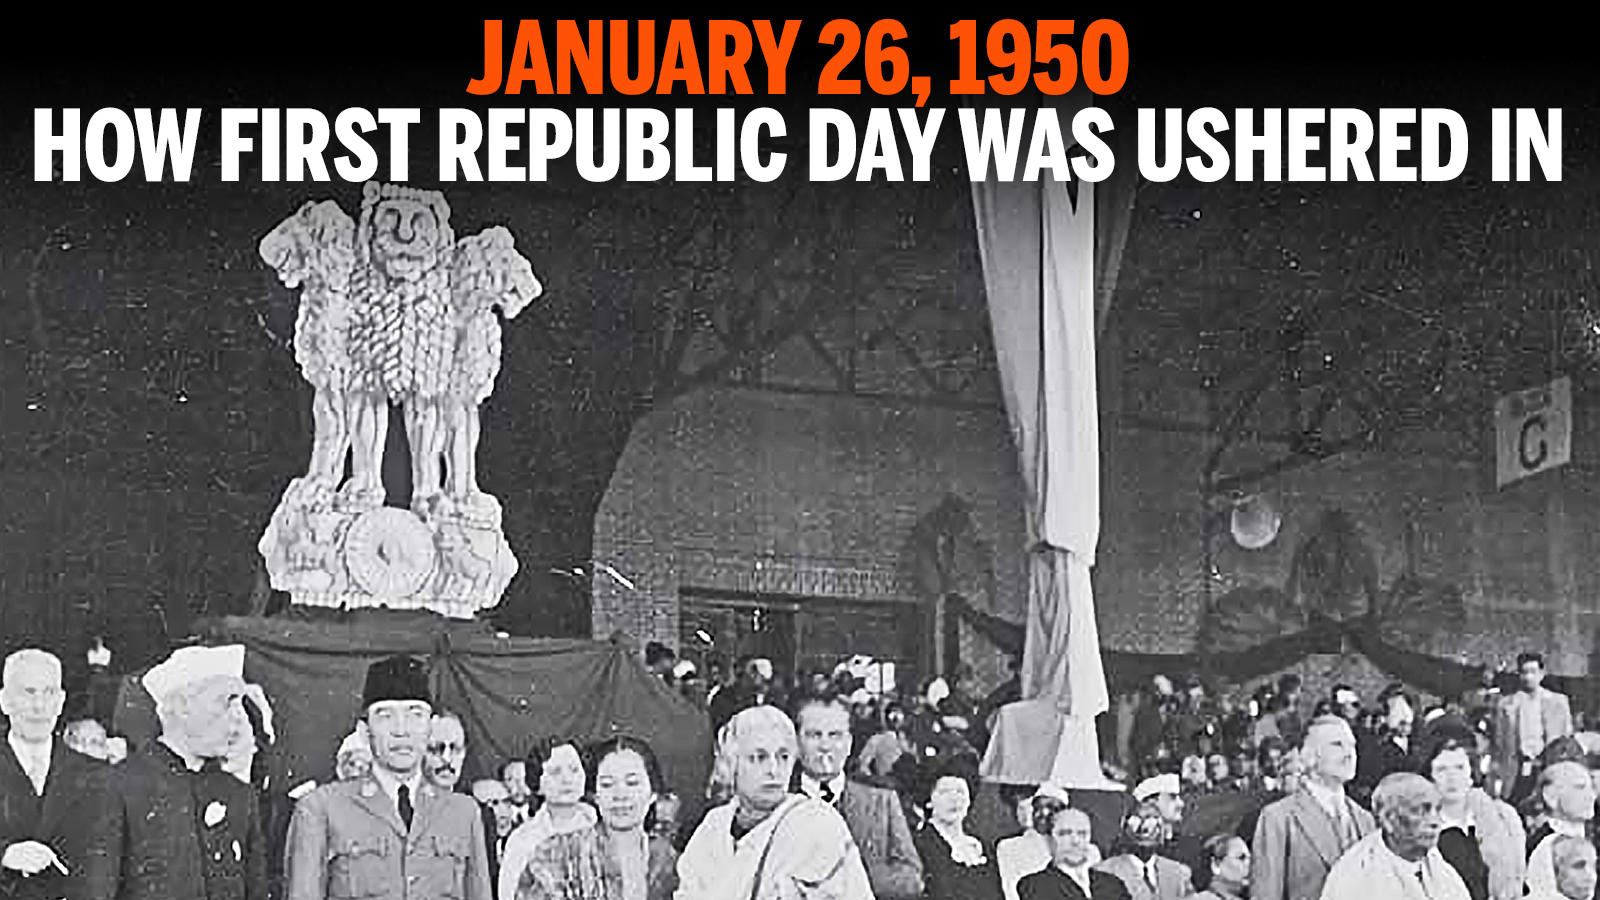 January 26, 1950 How first Republic Day was ushered in Times of India